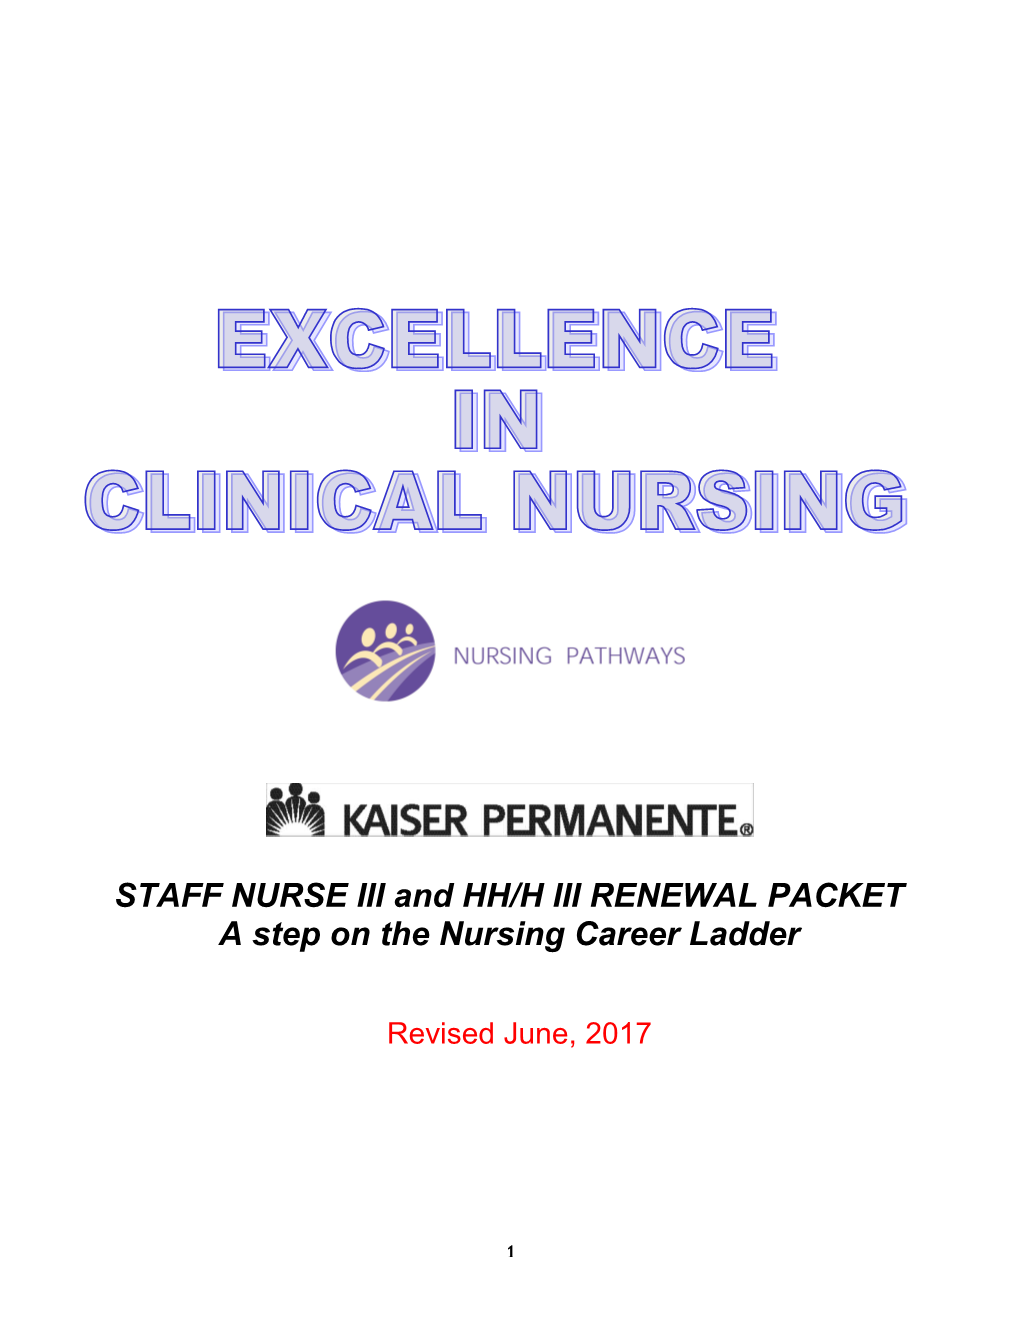 Prepared for the Staff Nurses of The